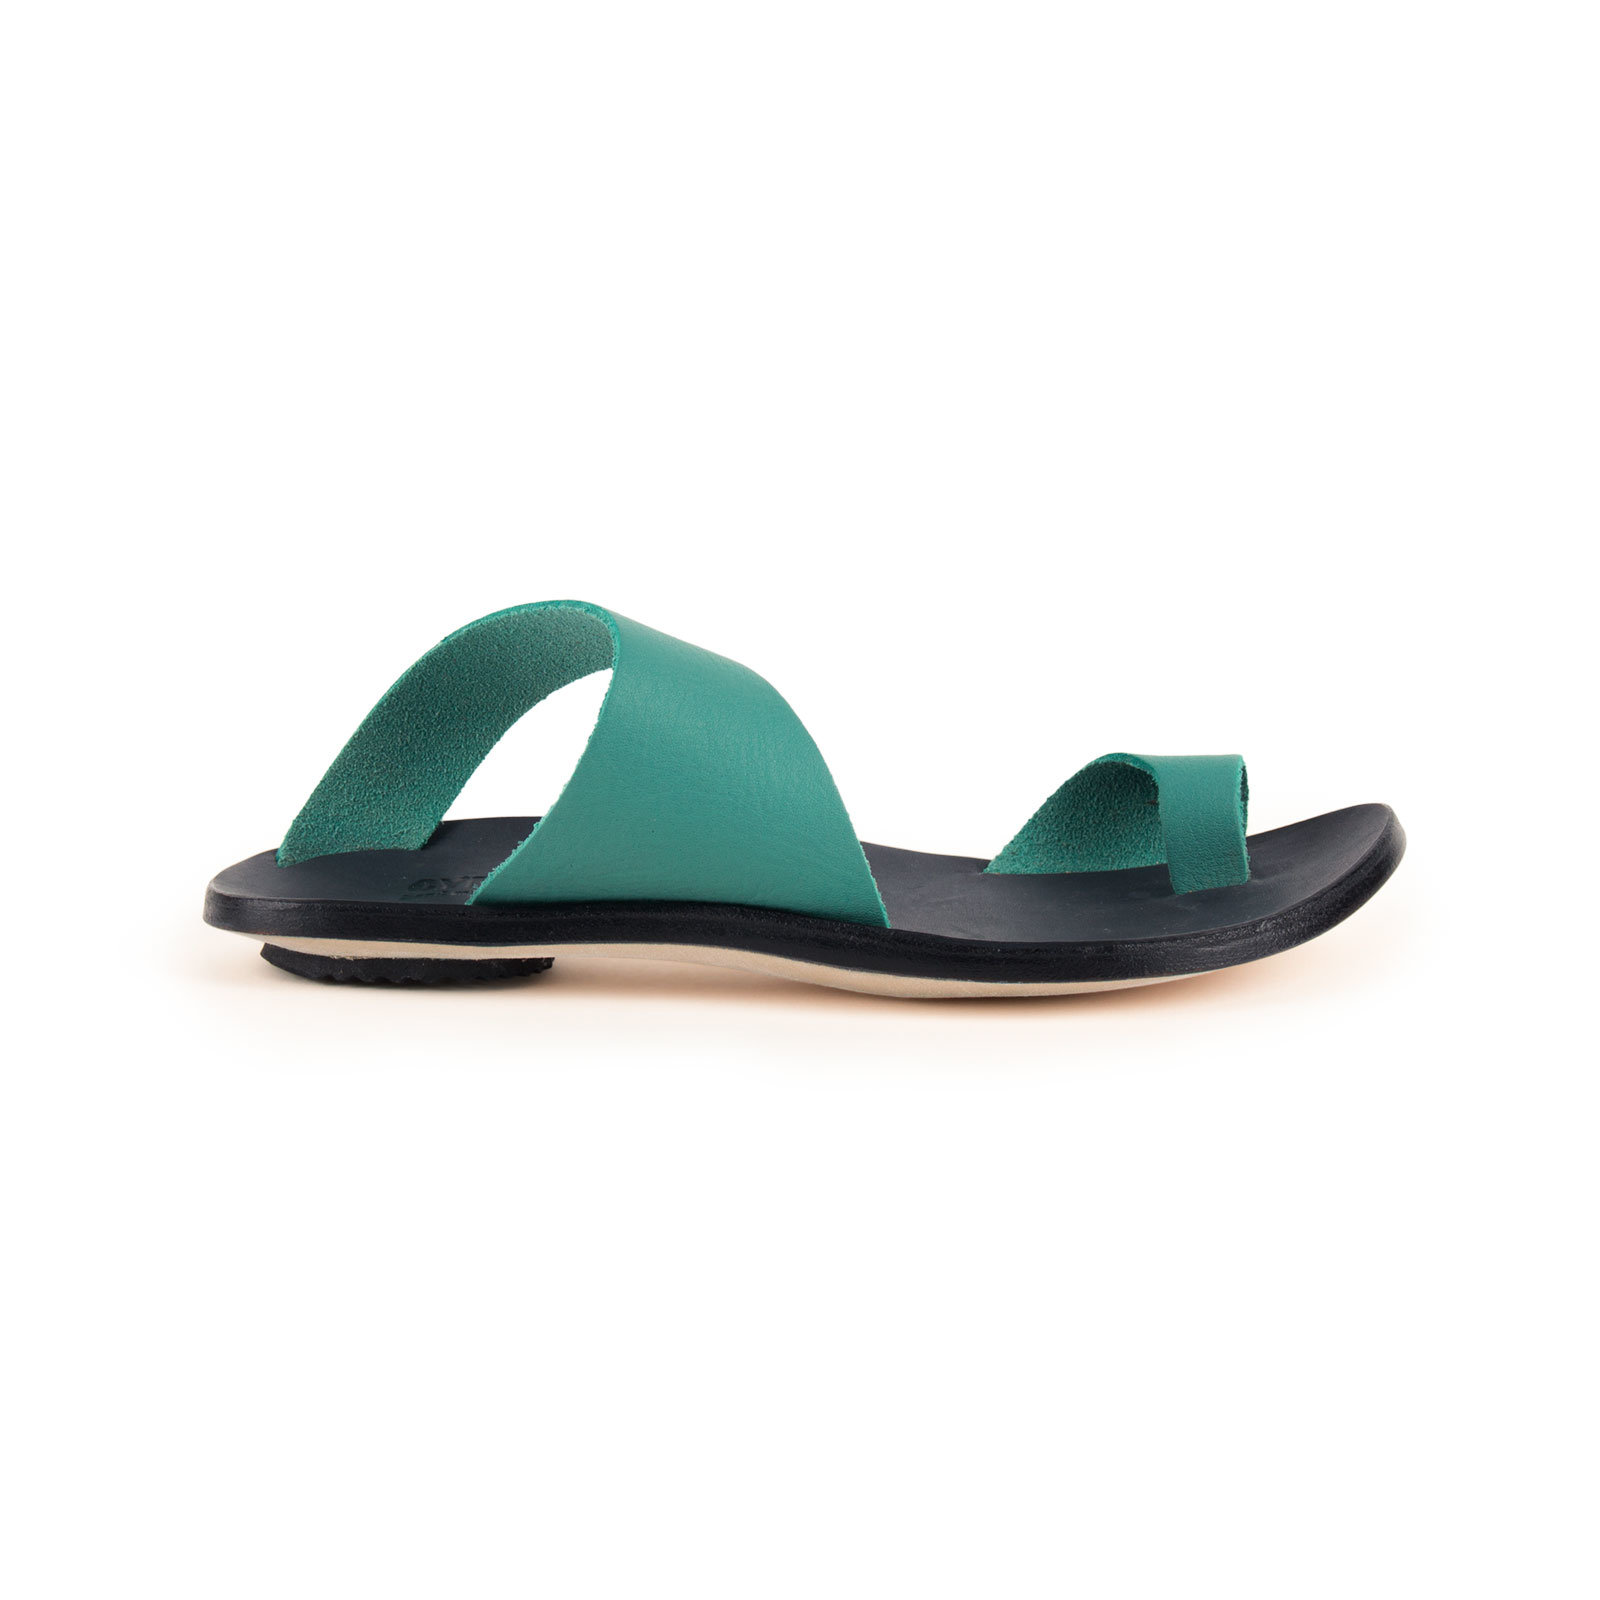 Thong Slide by CYDWOQ (Leather Sandal) | Artful Home